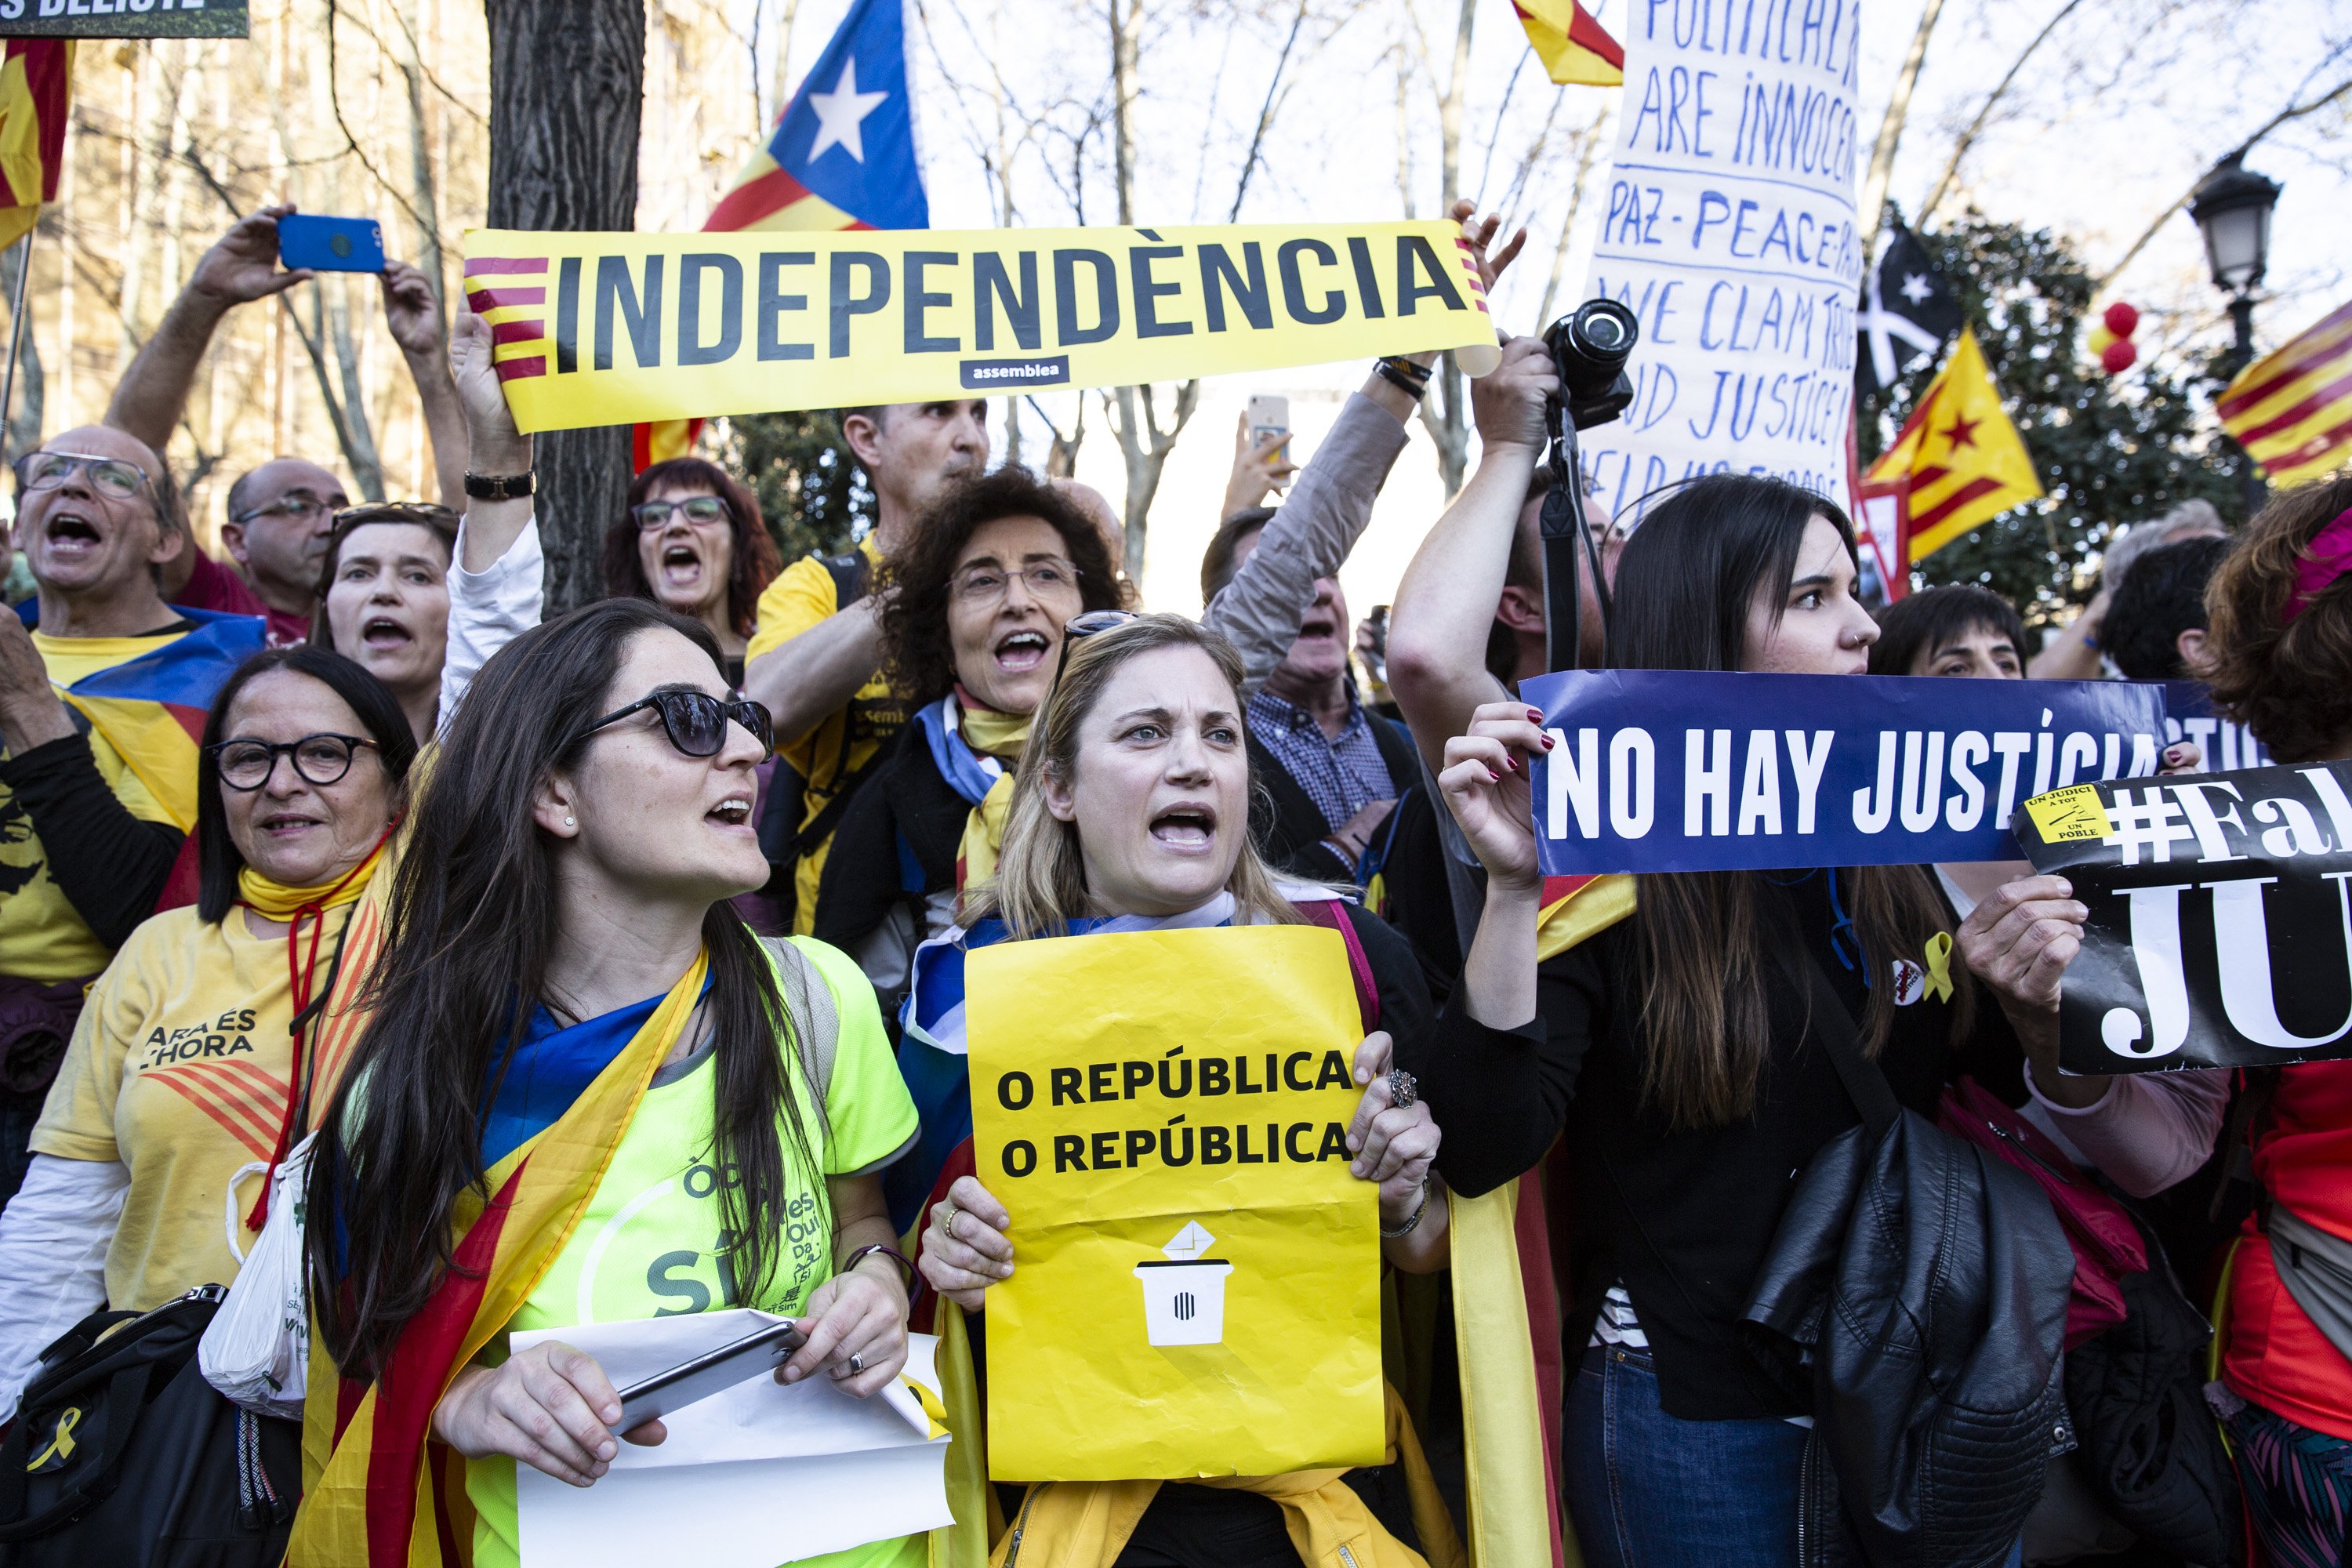 "The first time in Madrid": world media report Catalan march in Spain's capital